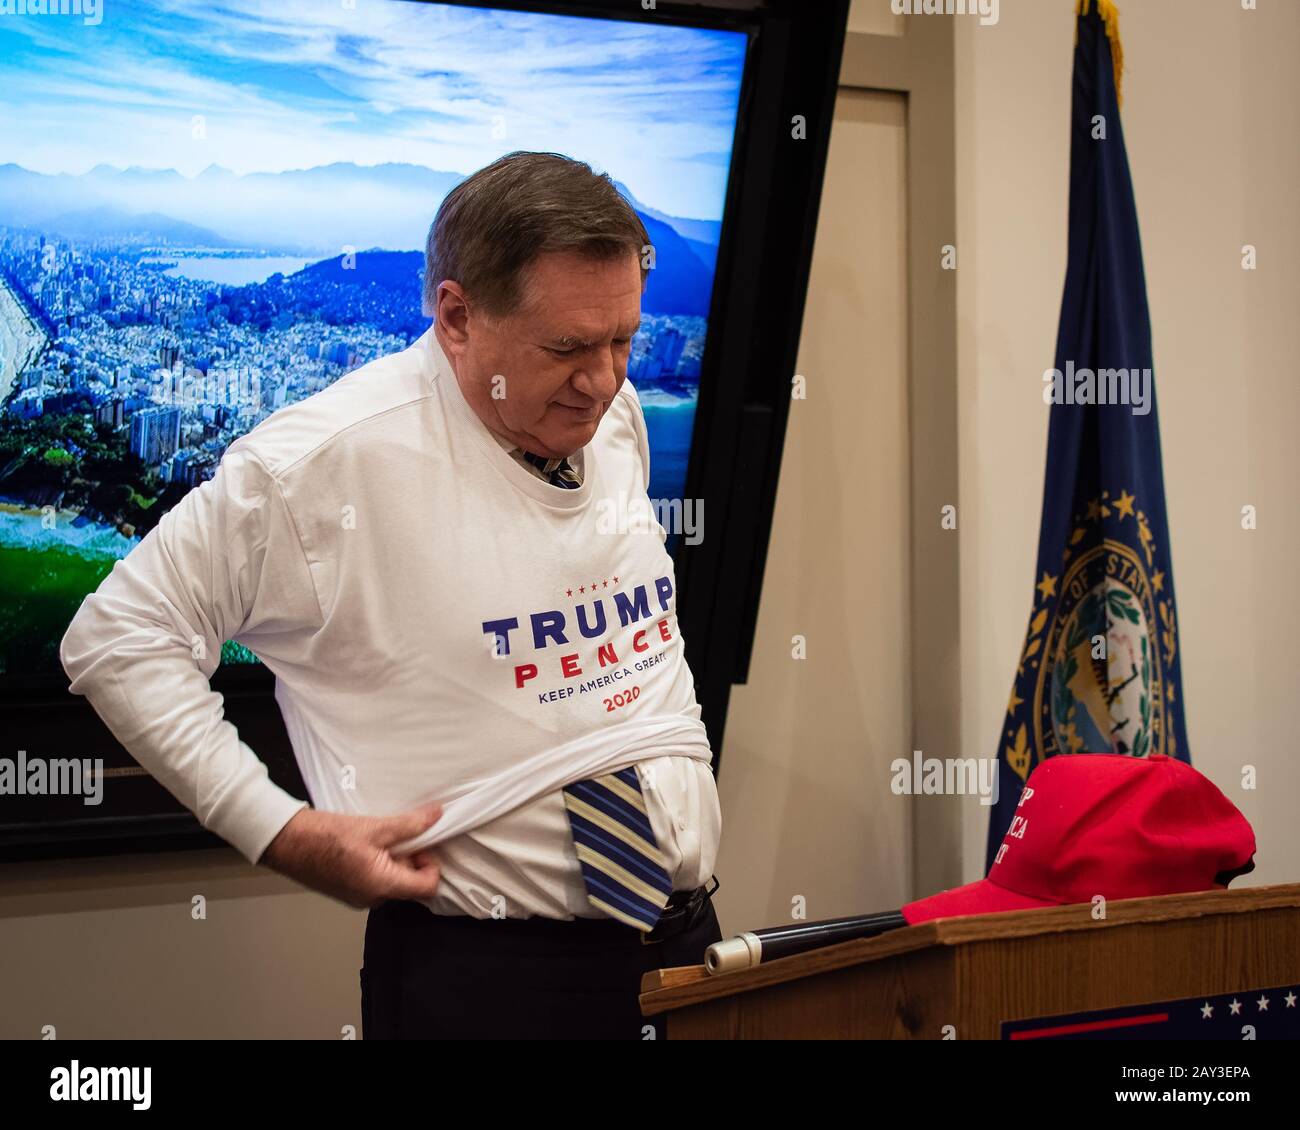 The Republican Executive Committee Chairman Stephen Stepanek puts on a Trump 'Keep America Great' t-shirt over his white shirt Stock Photo